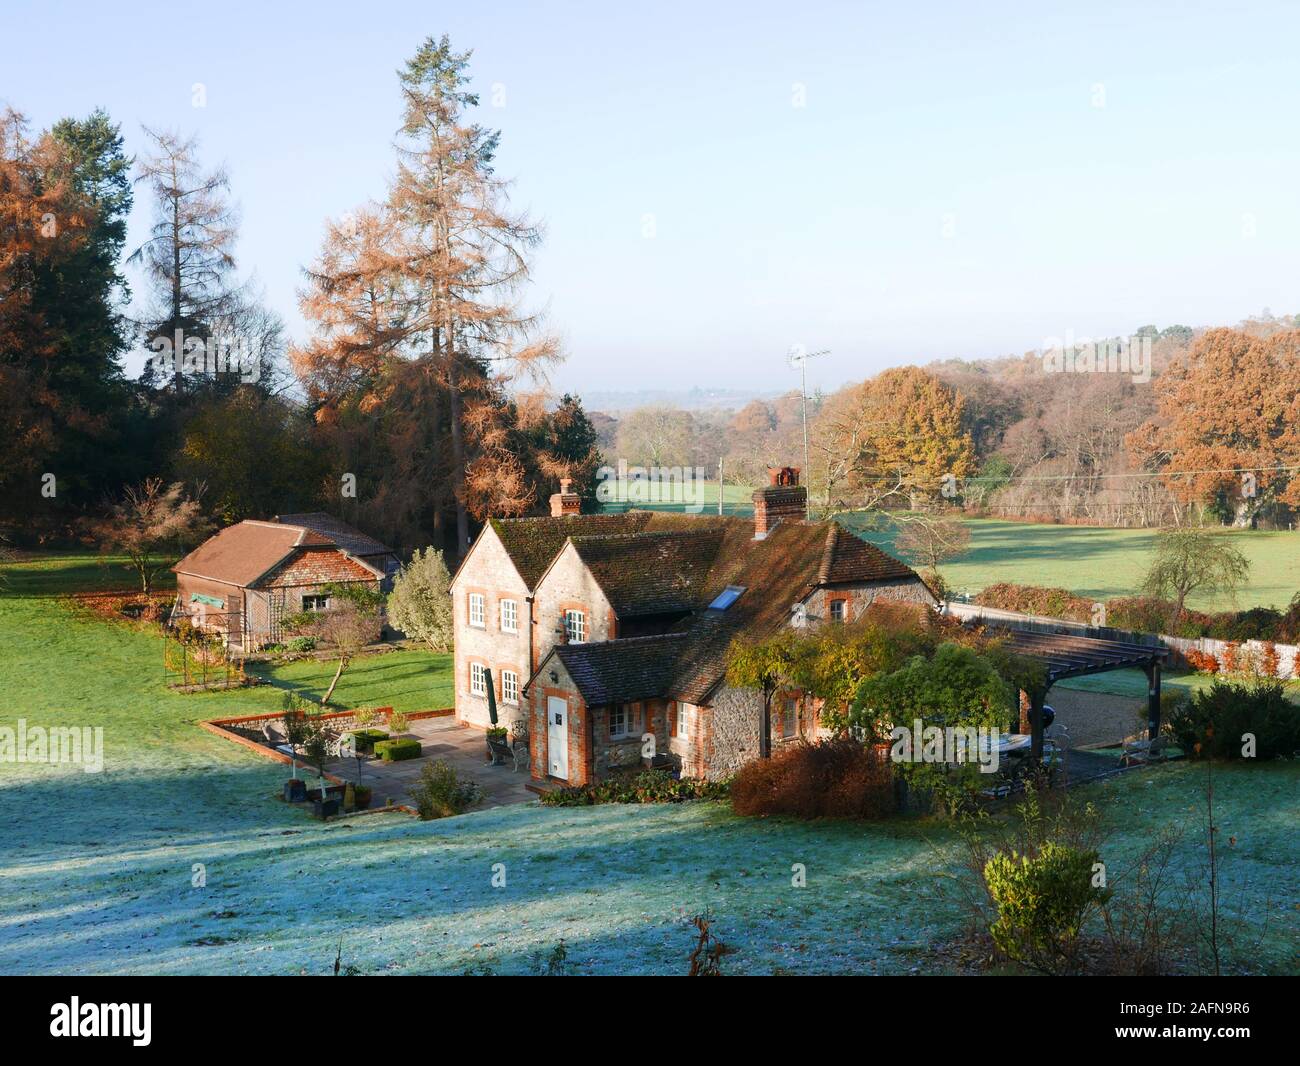 Quintessential English Country cottage in misty valley surrounded by trees with frost and dew on a green grass lawn Stock Photo